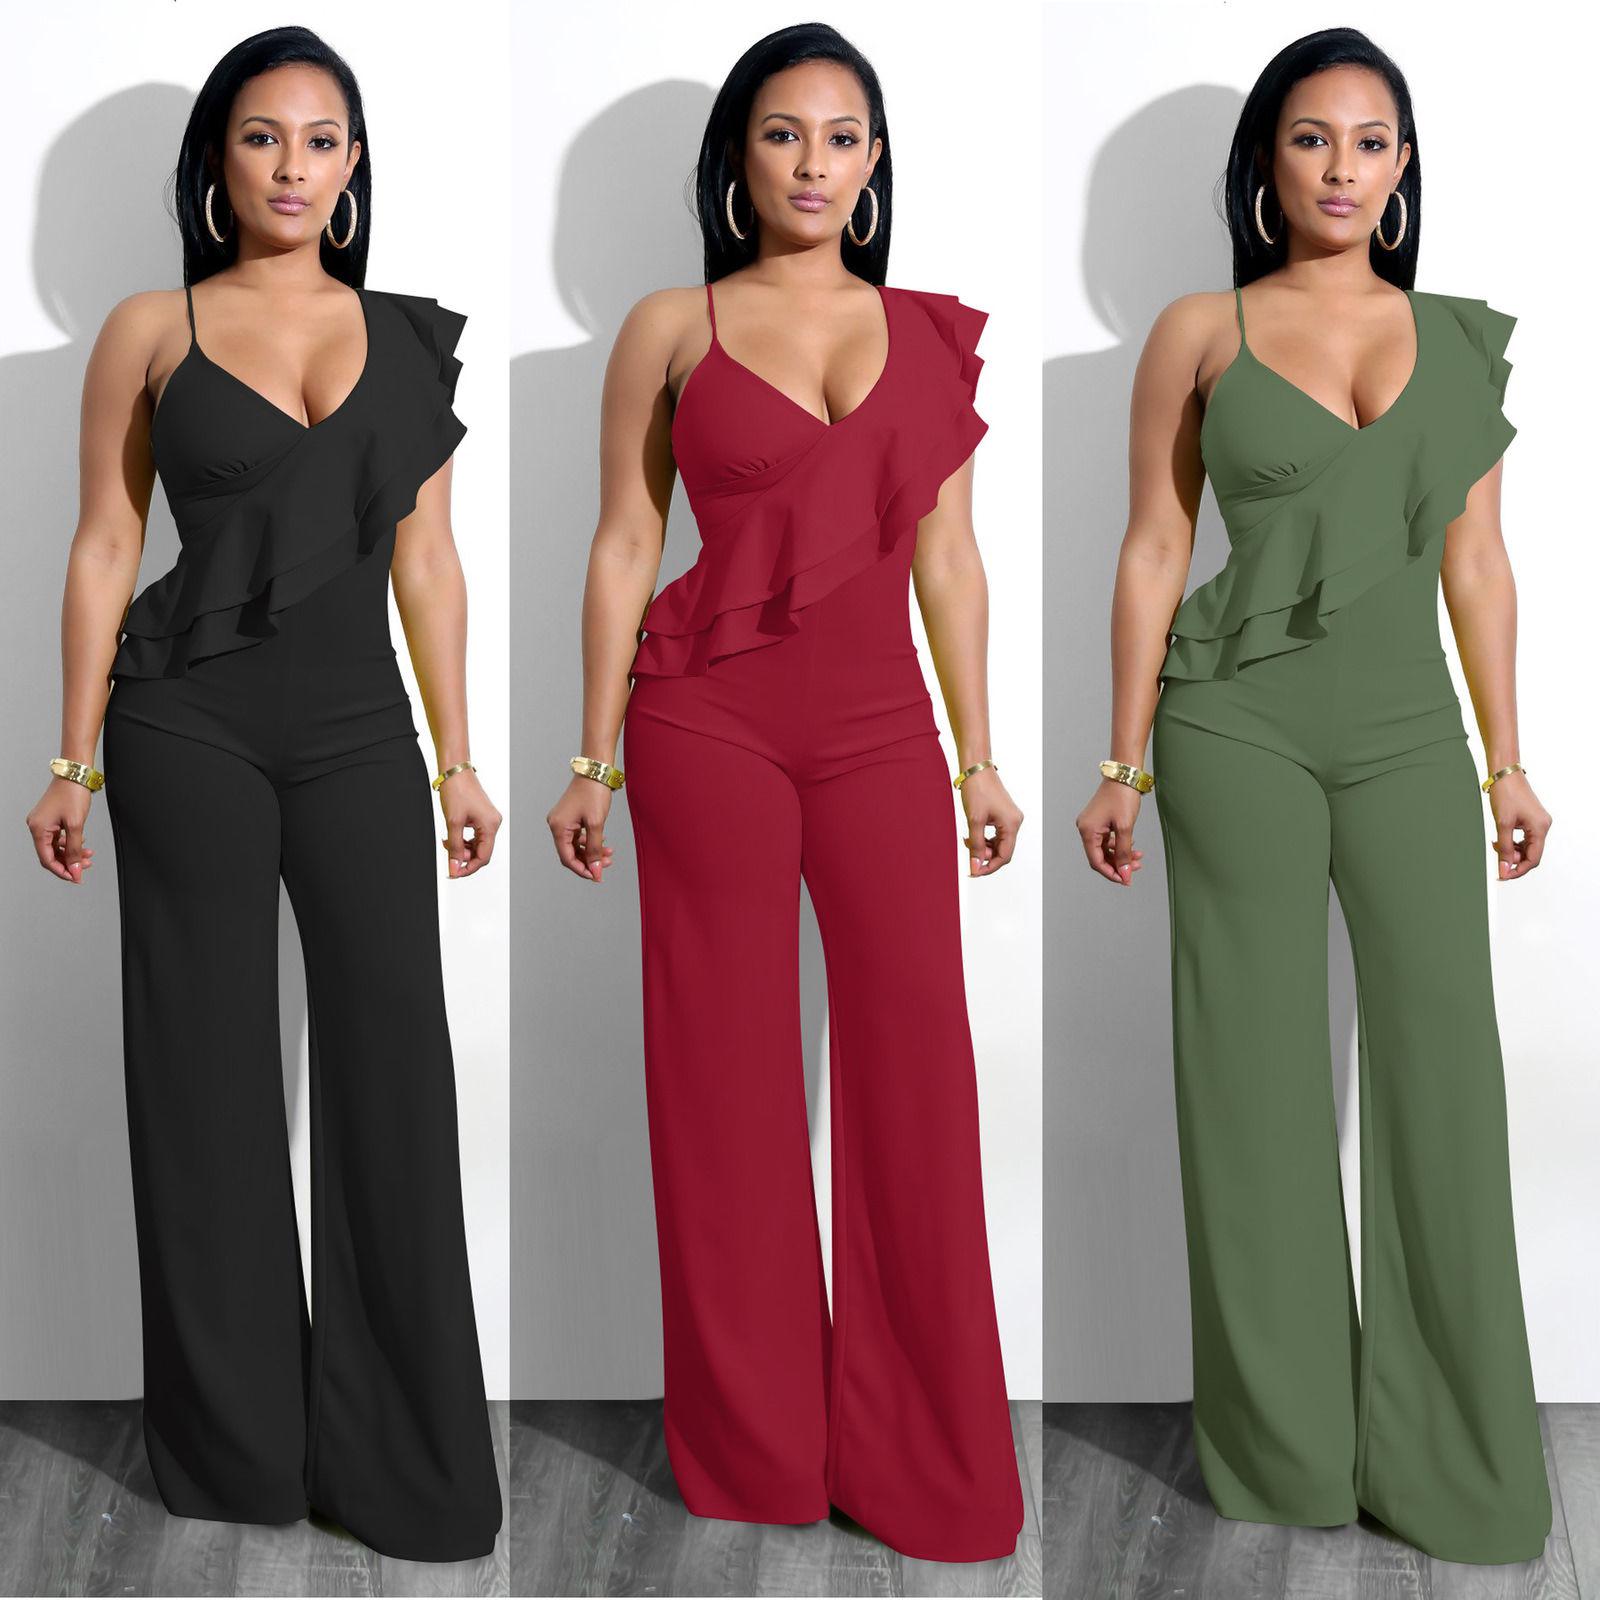 zakdoek rook Roman Sexy Women sleeveless ruffled v Neck bodycon casual club party jumpsuit  rompers on Stylevore